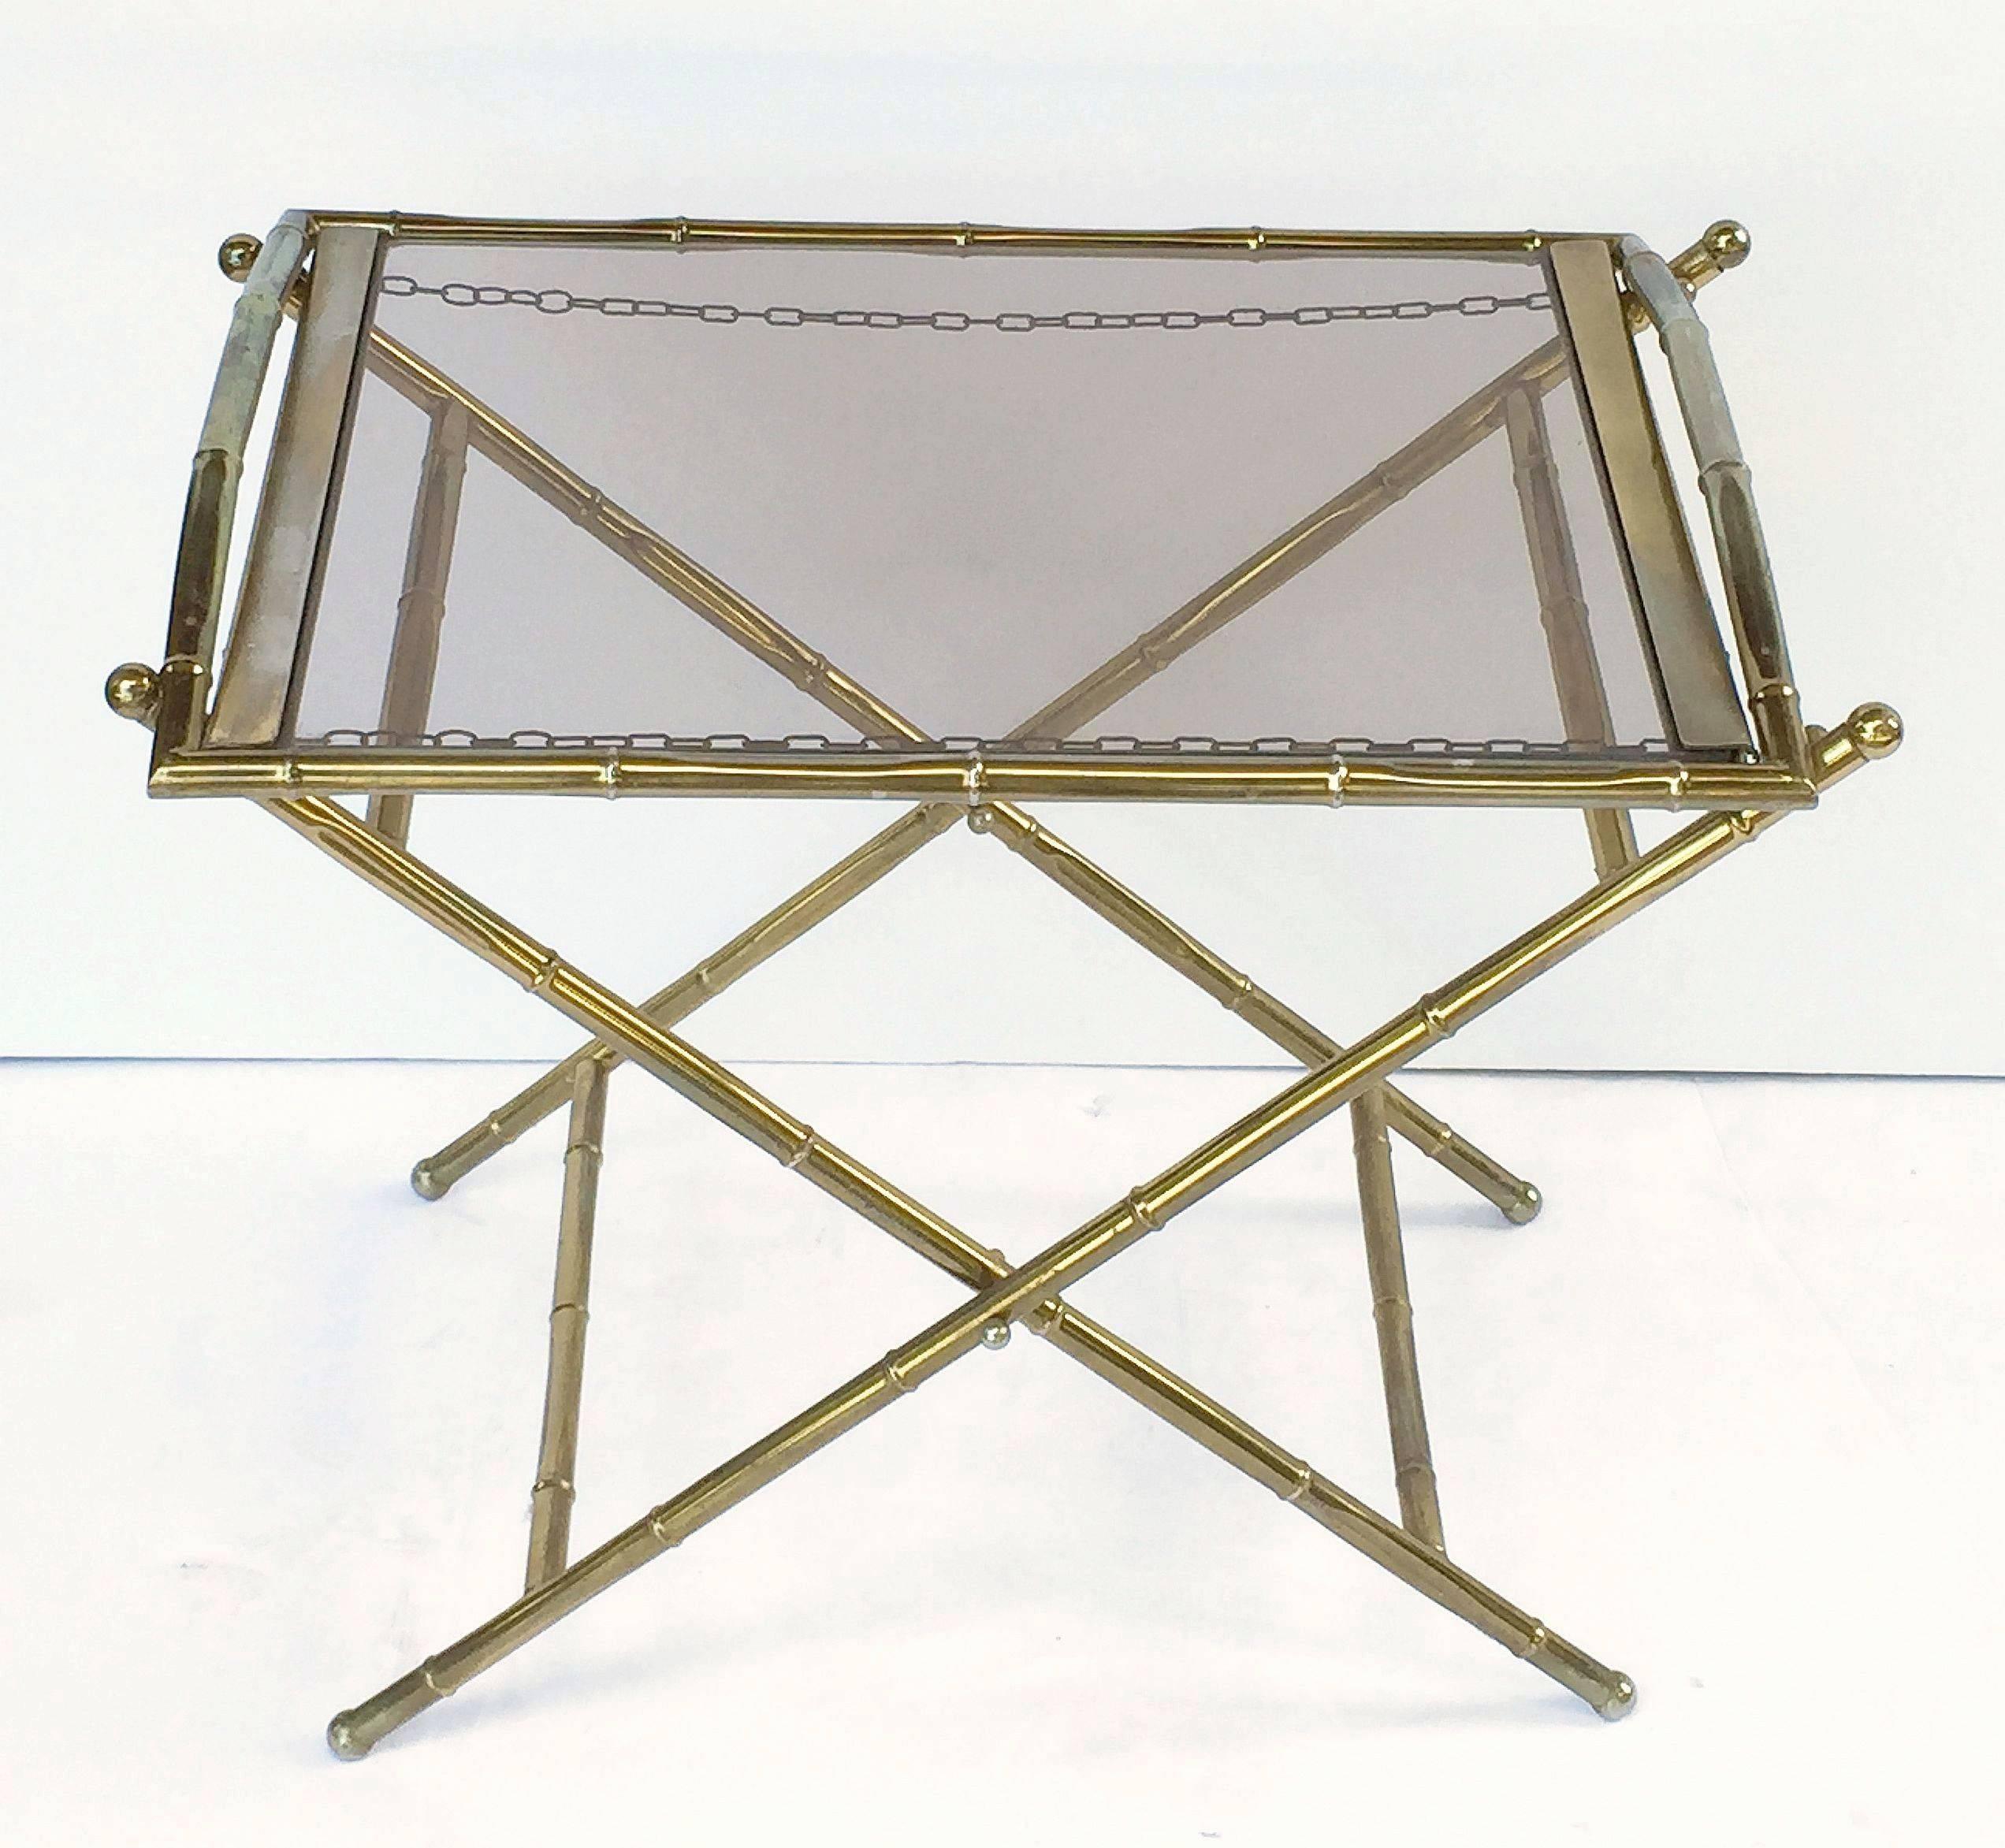 A fine French low or side tray table featuring a removable serving tray with a bamboo design in brass with inset smoked glass, set upon a folding stand.